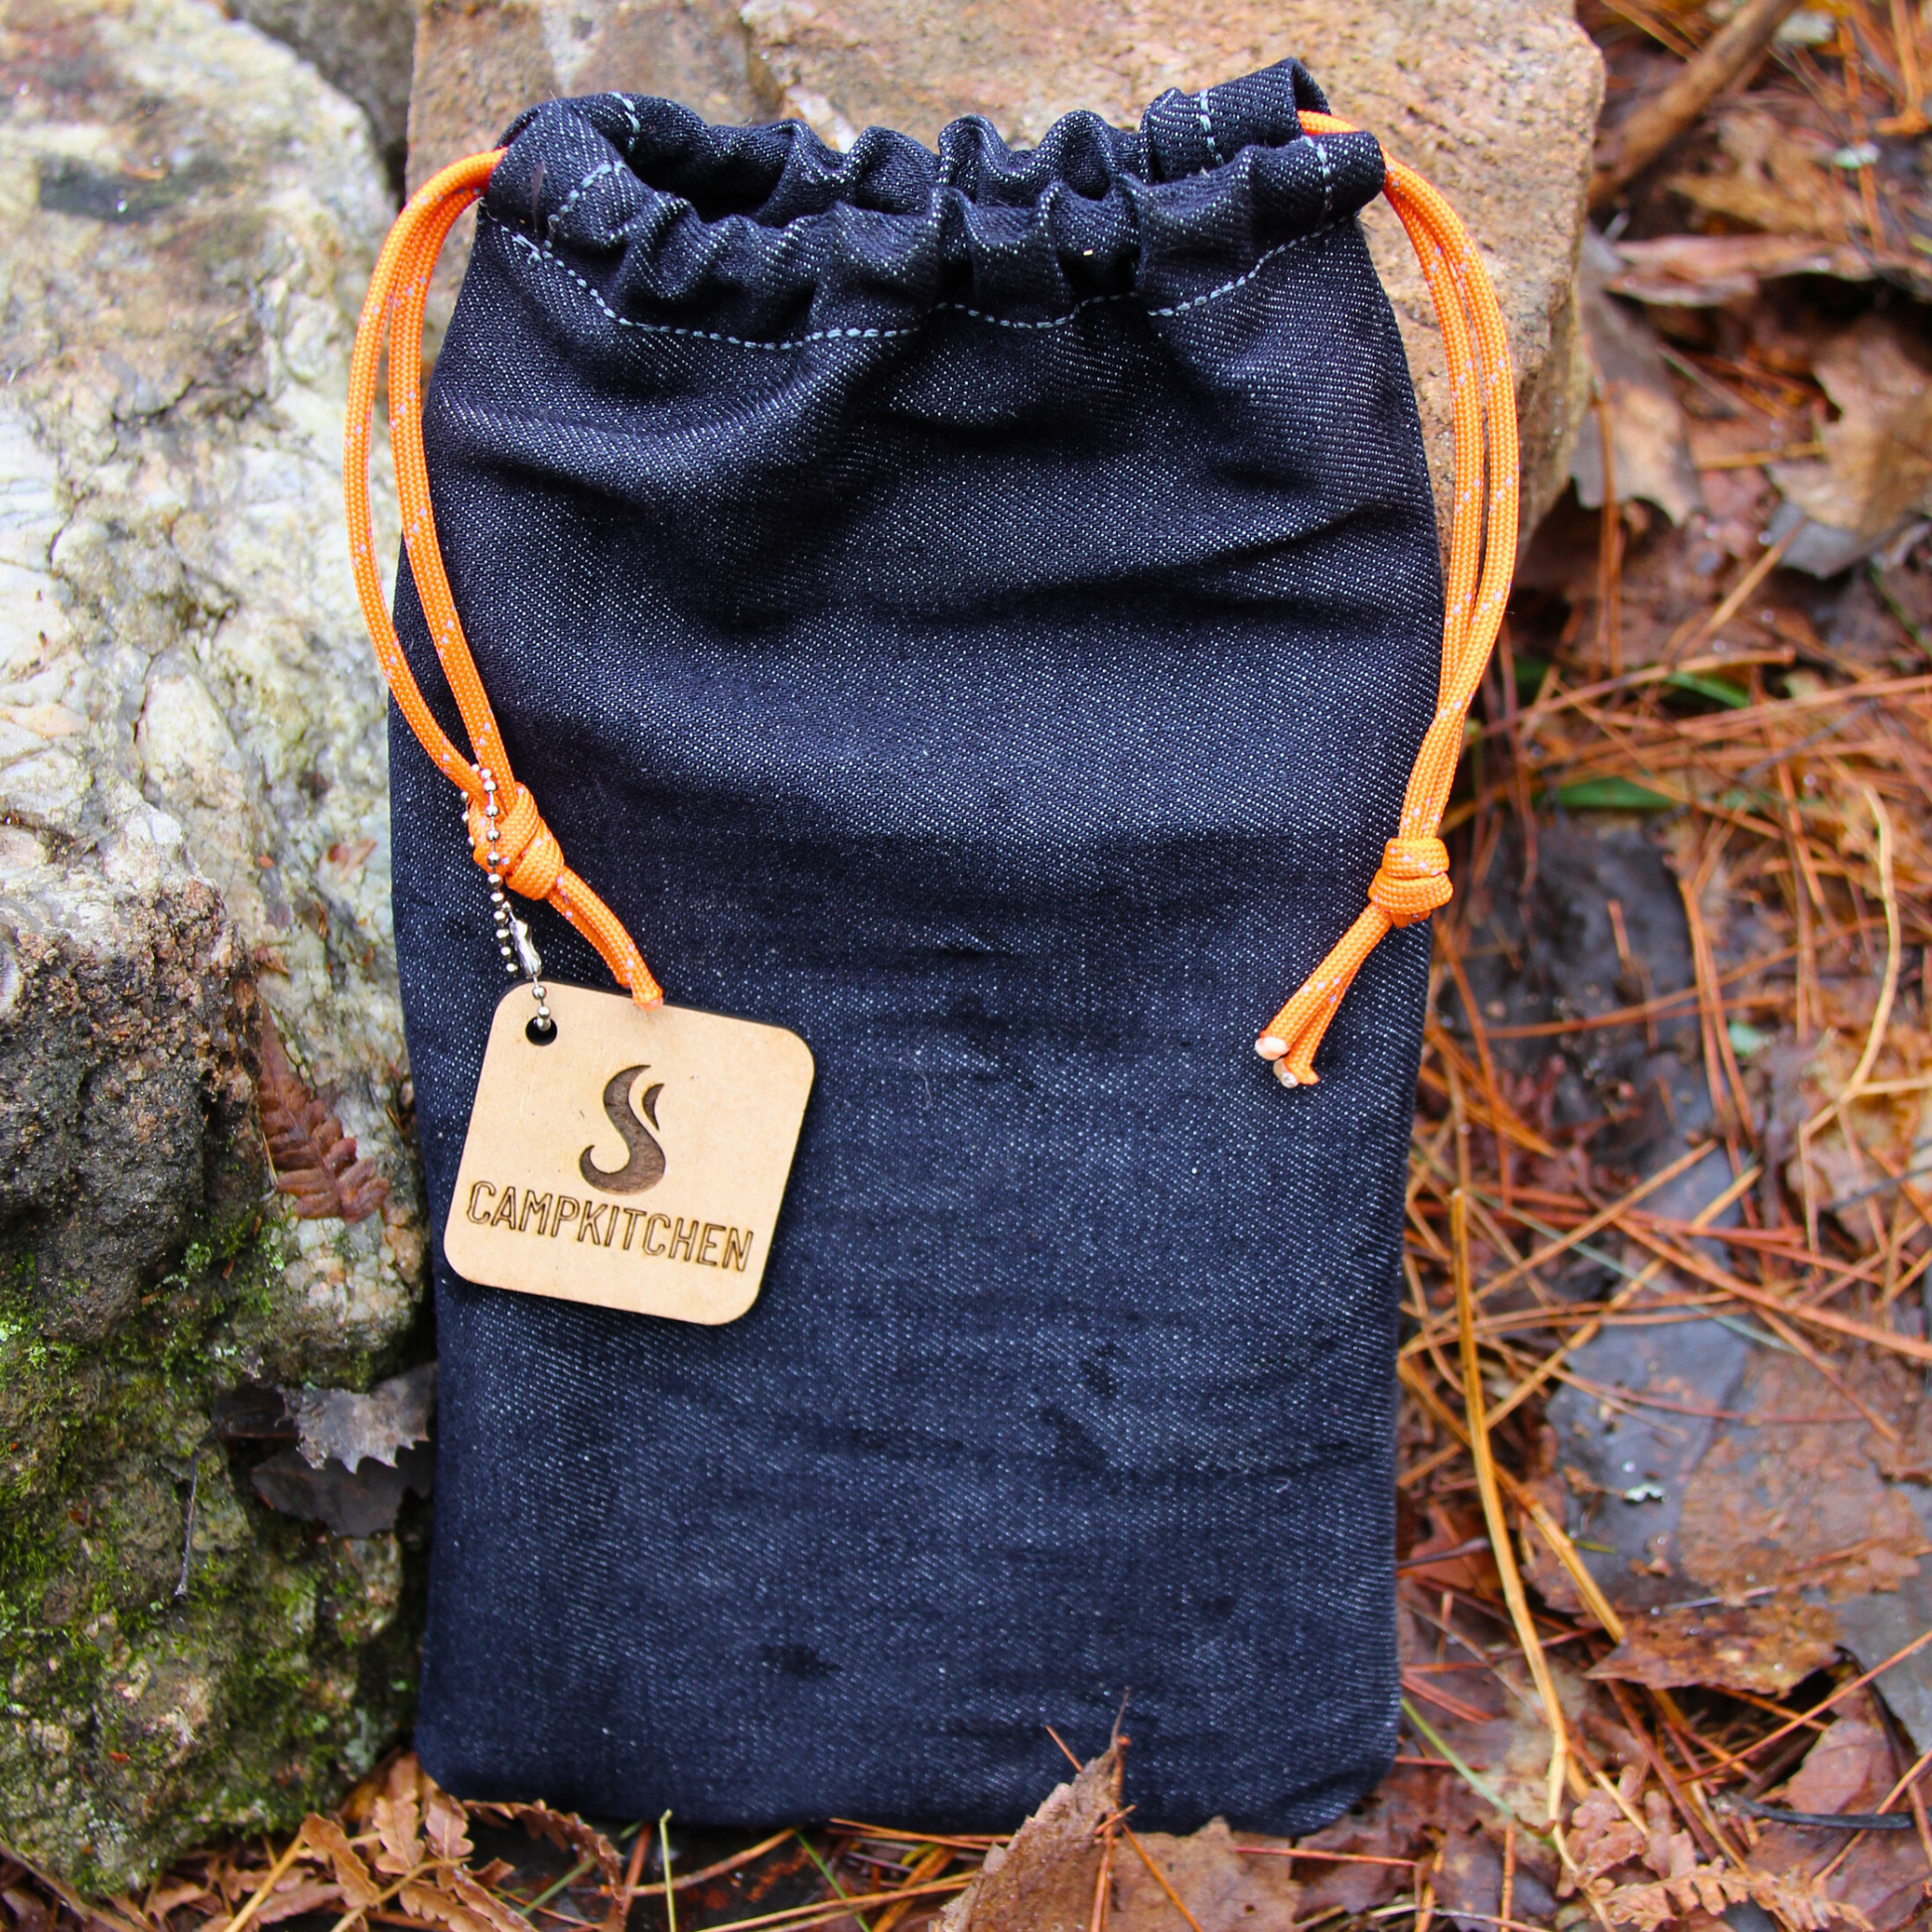 CAMPKITCHEN Twig Stove packed inside of a hand stitched denim bag equipped with paracord drawstrings.